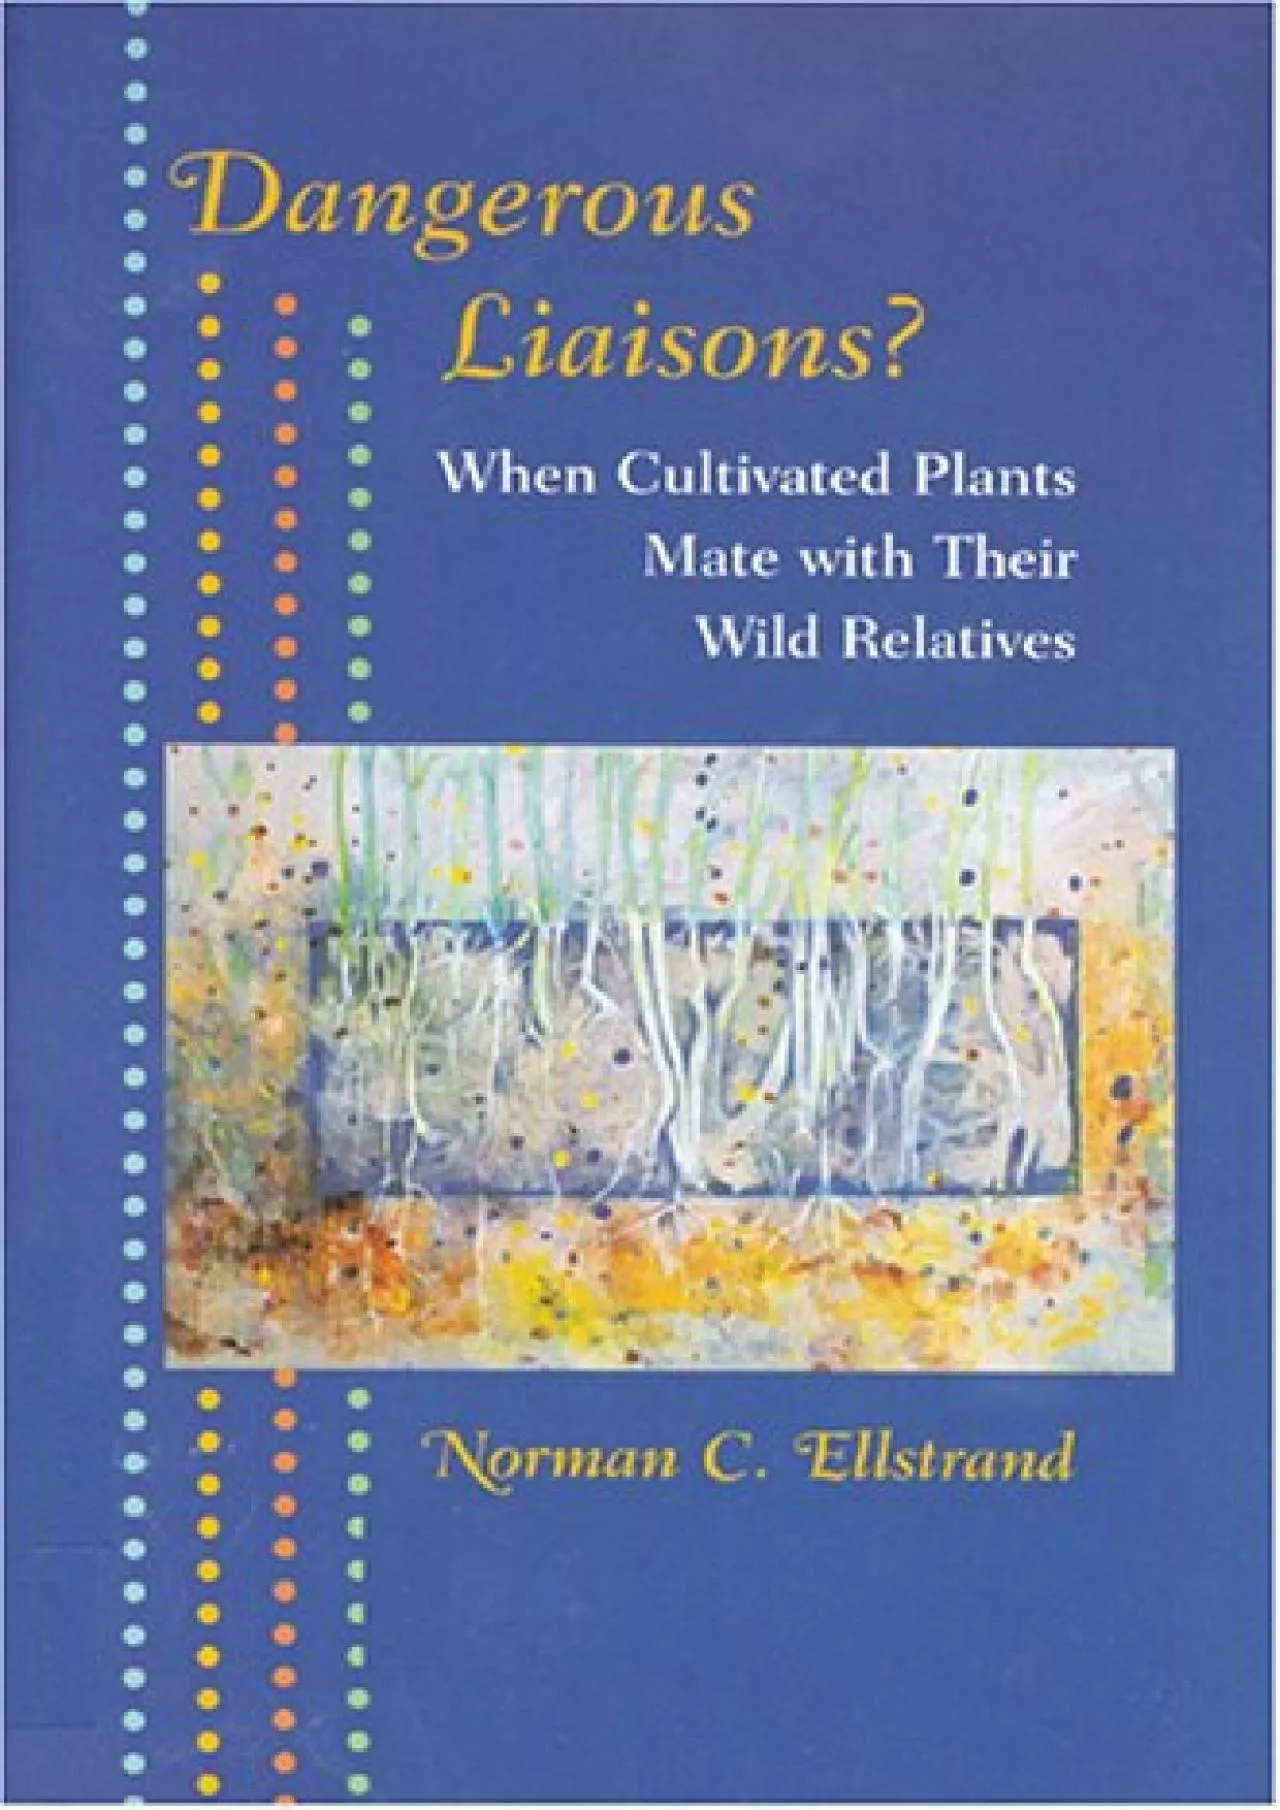 (BOOK)-Dangerous Liaisons?: When Cultivated Plants Mate with Their Wild Relatives (Syntheses